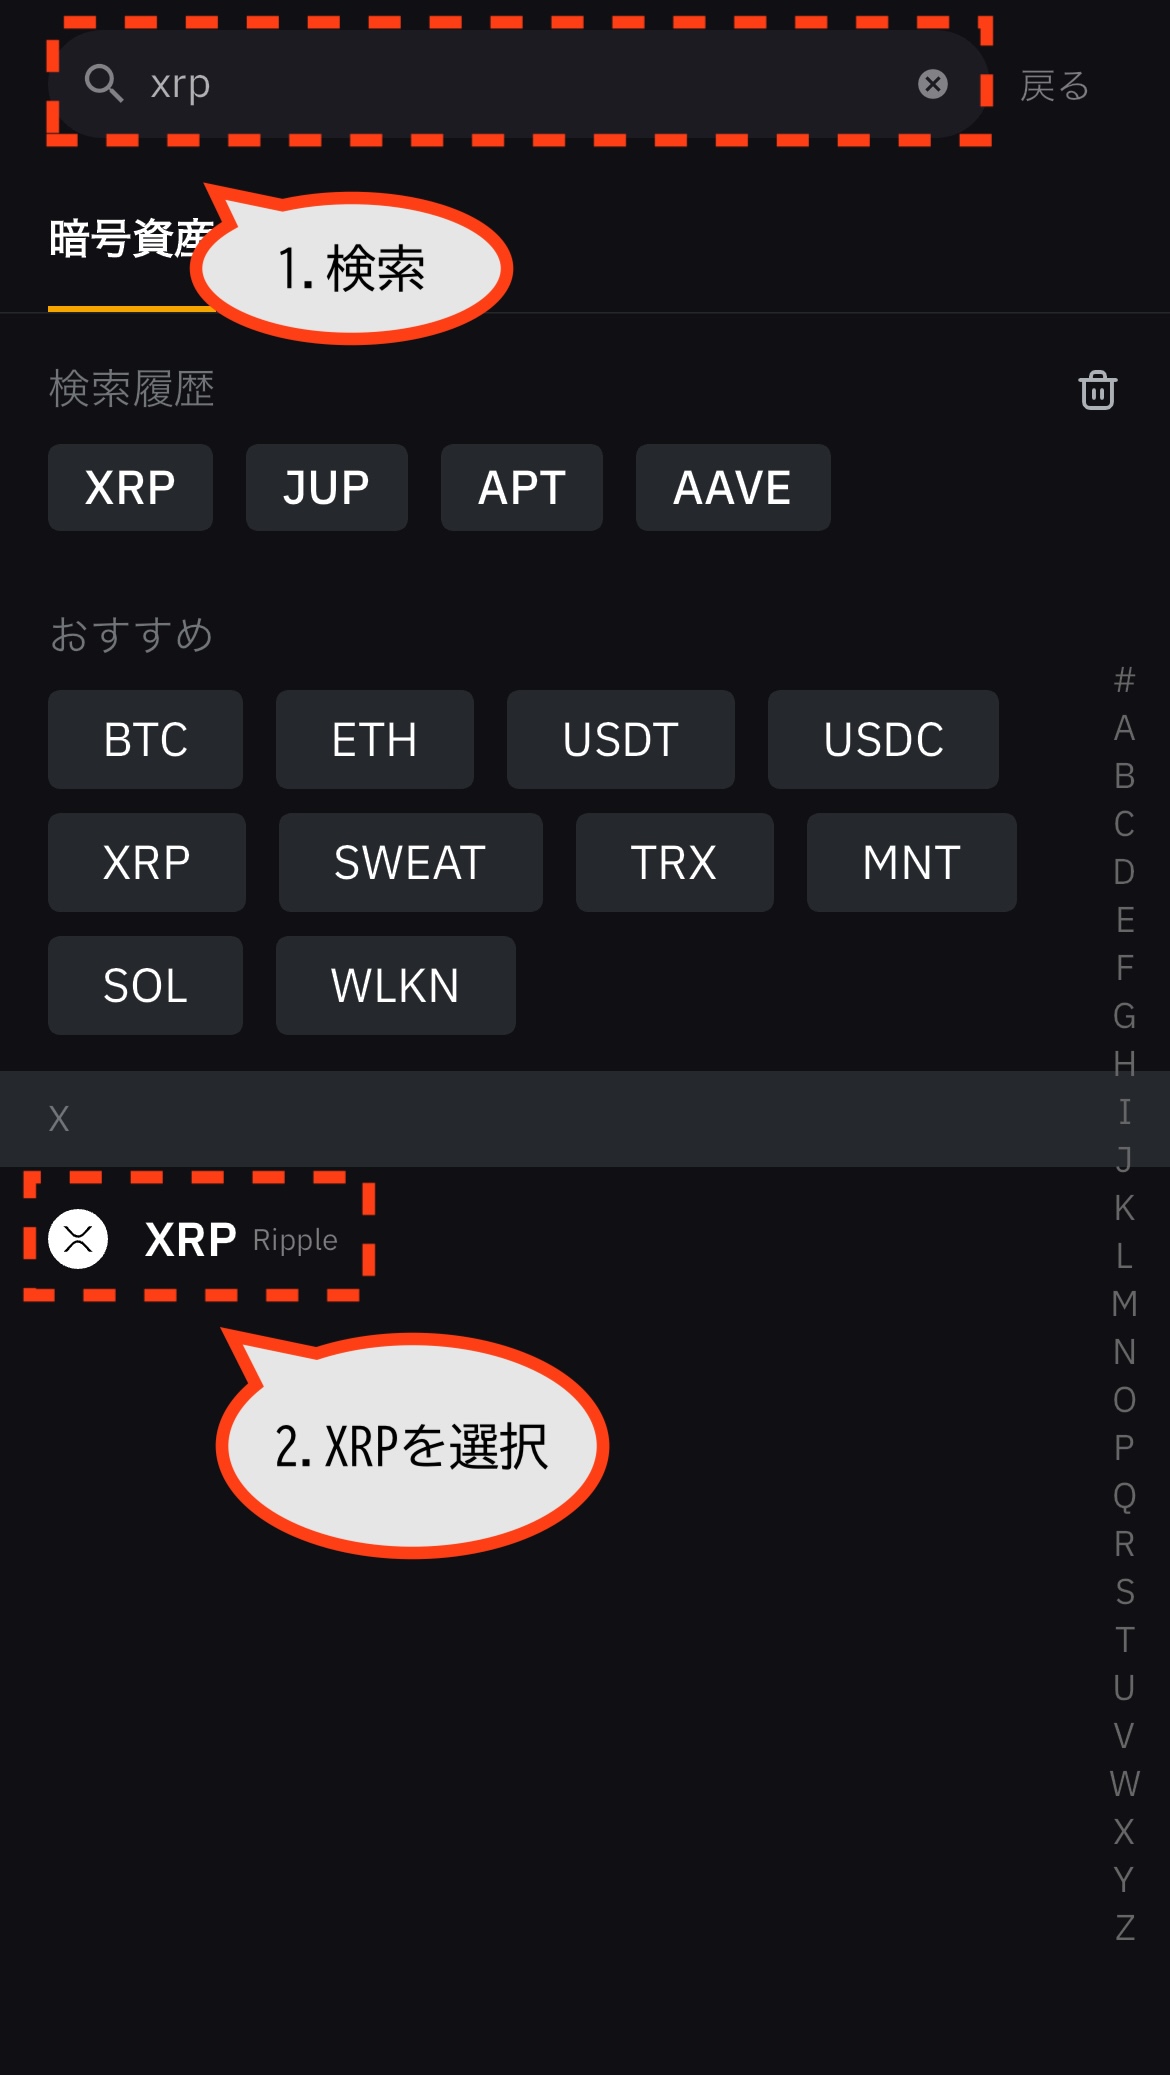 XRPを検索して選択